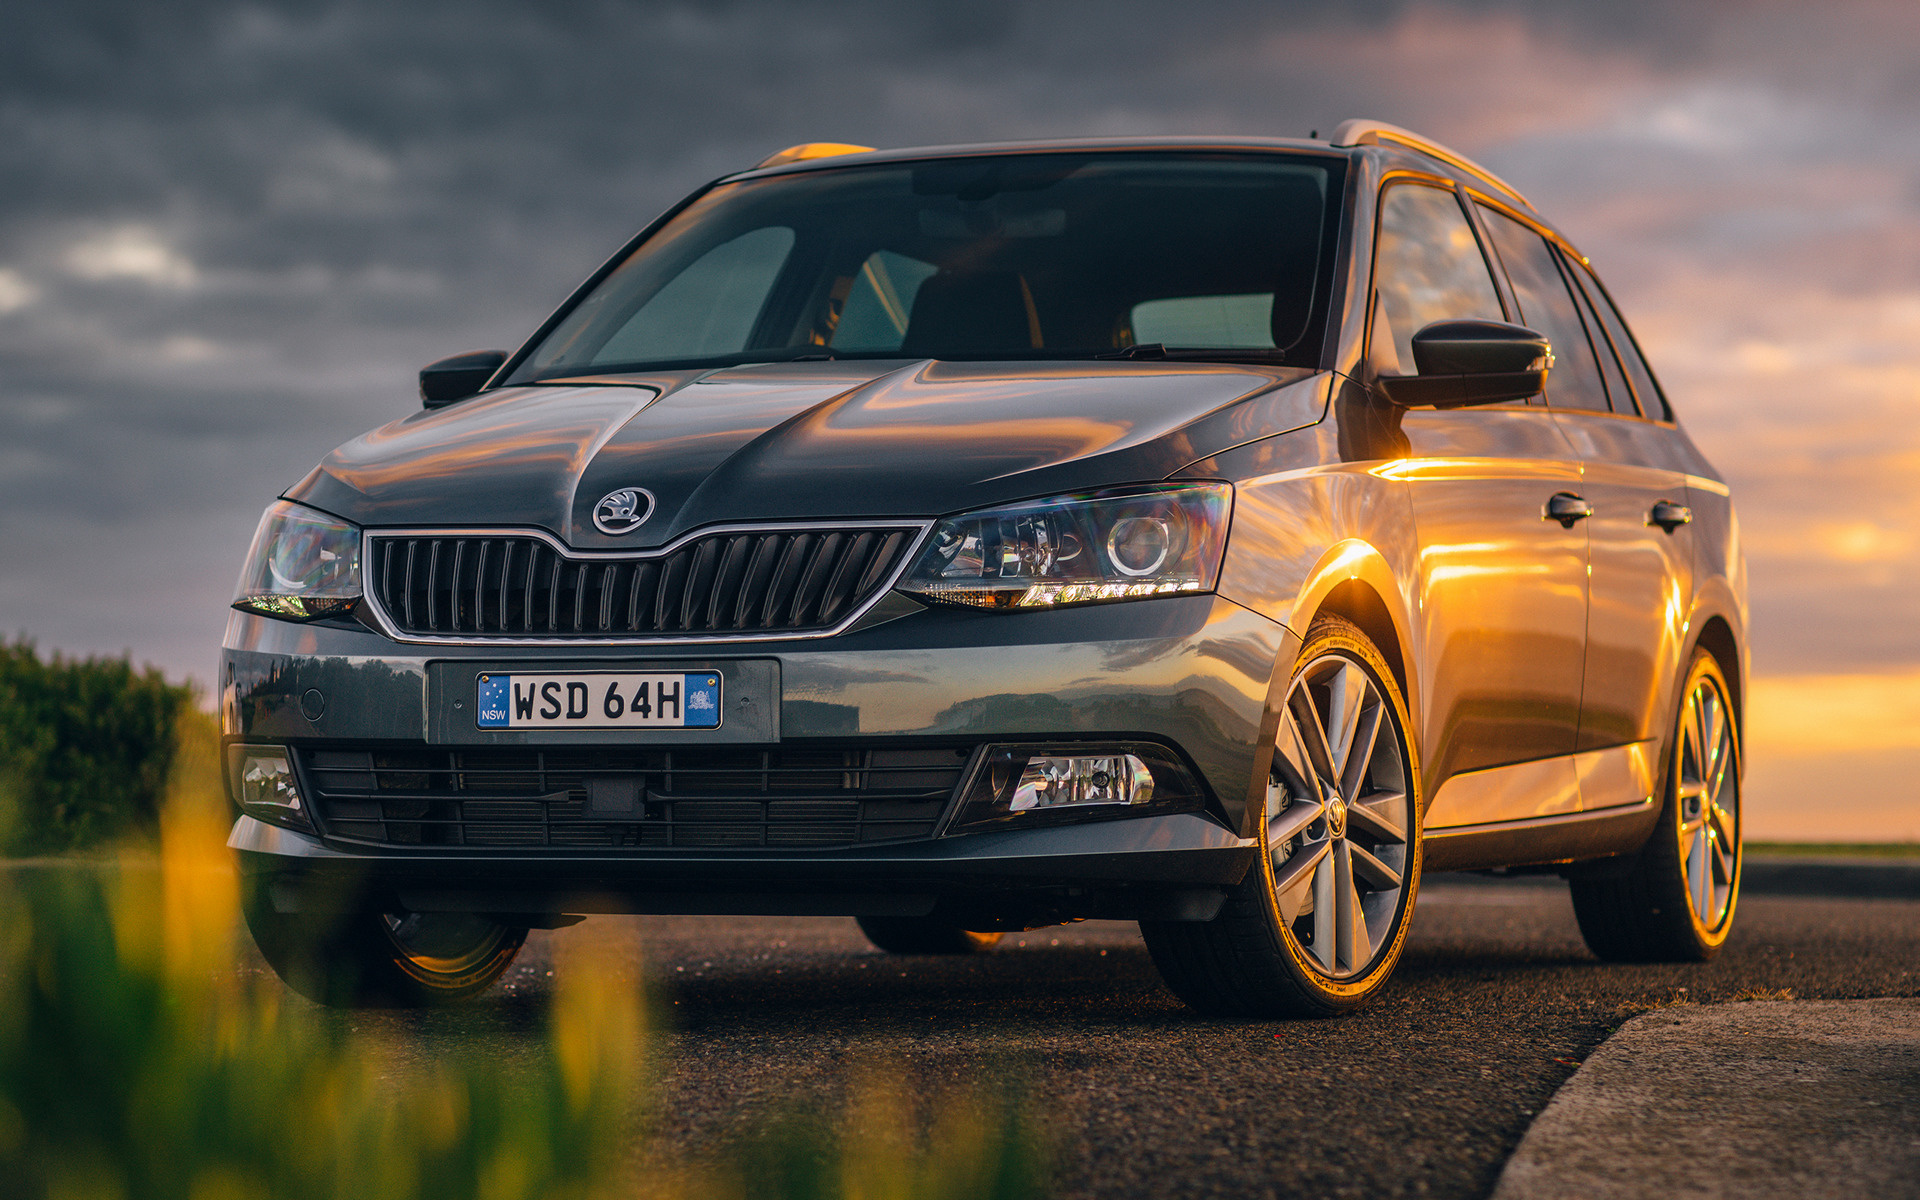 2015 Skoda Fabia Wagon AU   Wallpapers and HD Images Car Pixel 1920x1200